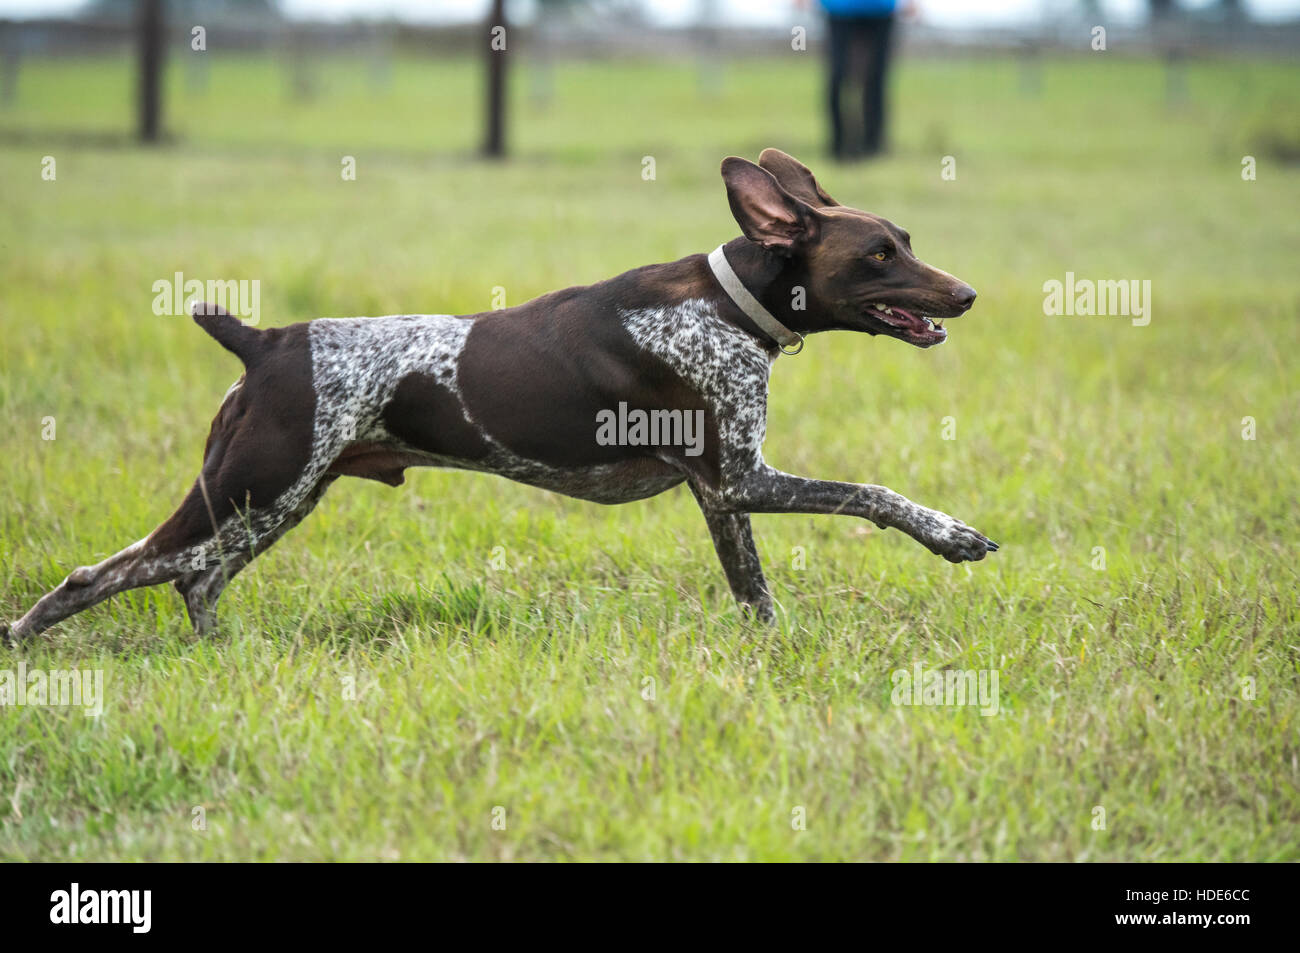 Grman Shorthaired Pointer running in grass Stock Photo